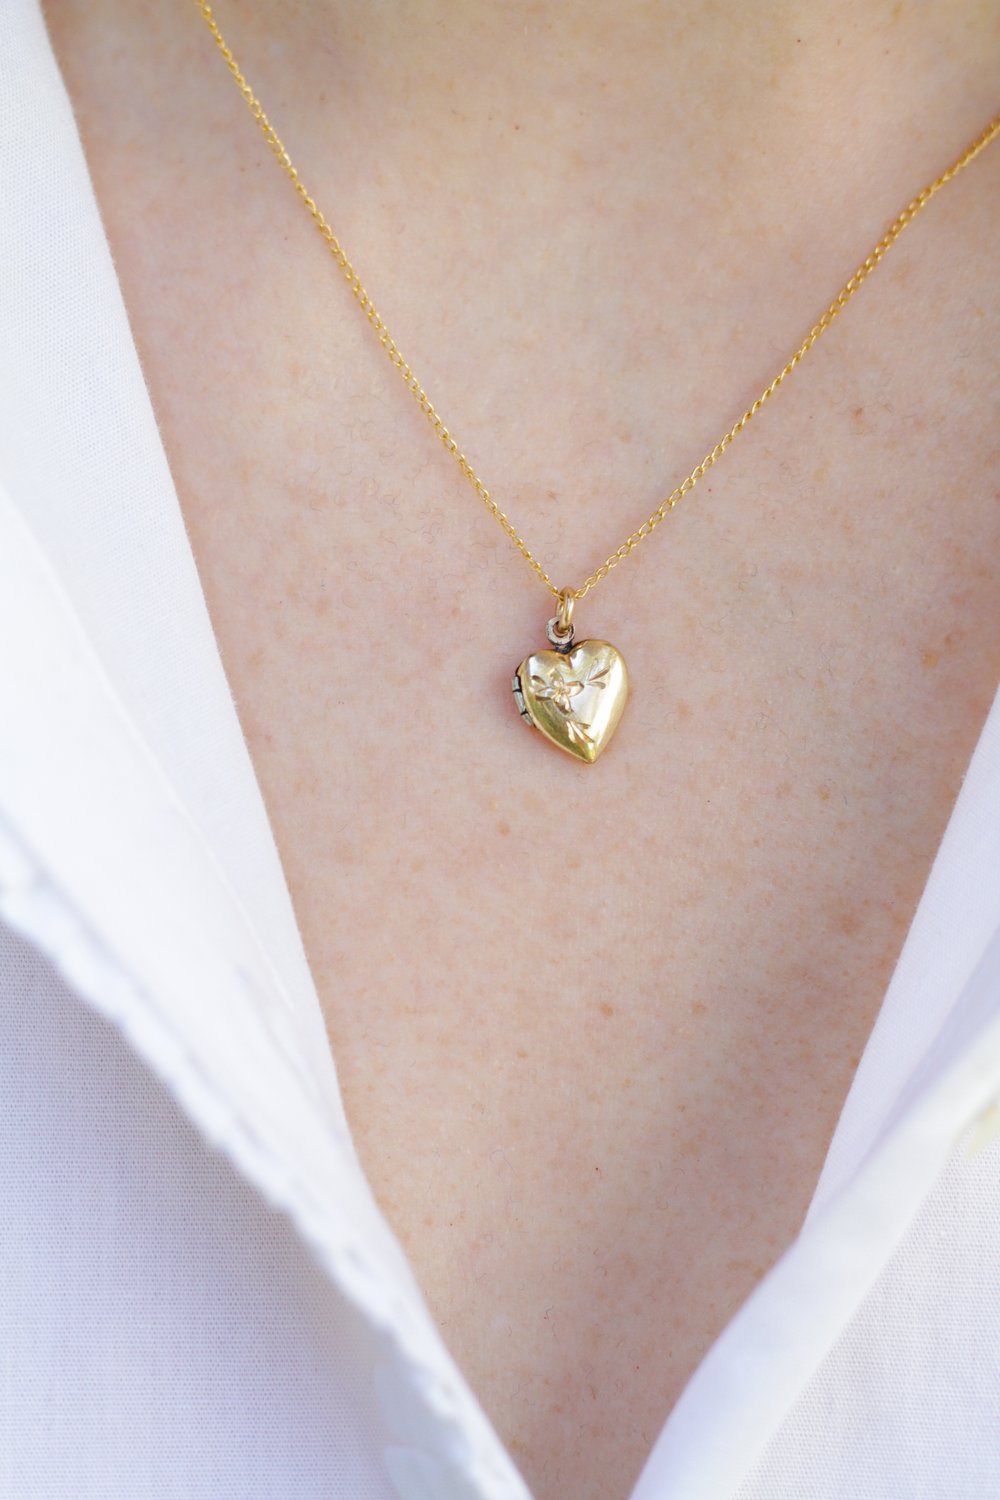 16" Petite Necklace with Antique Heart Locket